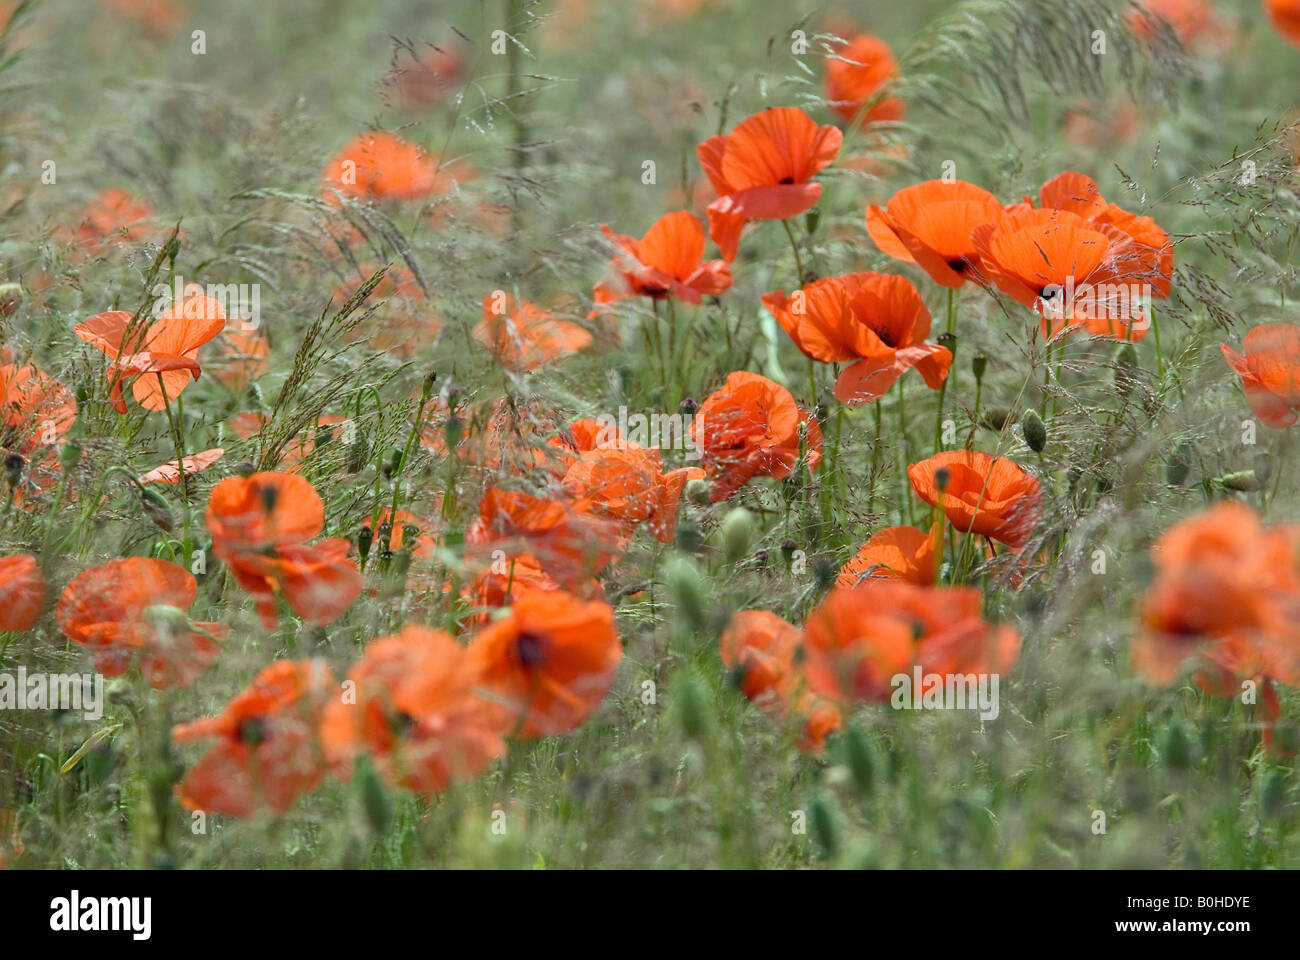 Red Poppies (Papaver rhoeas) growing on a field, blossoming, Germany Stock Photo